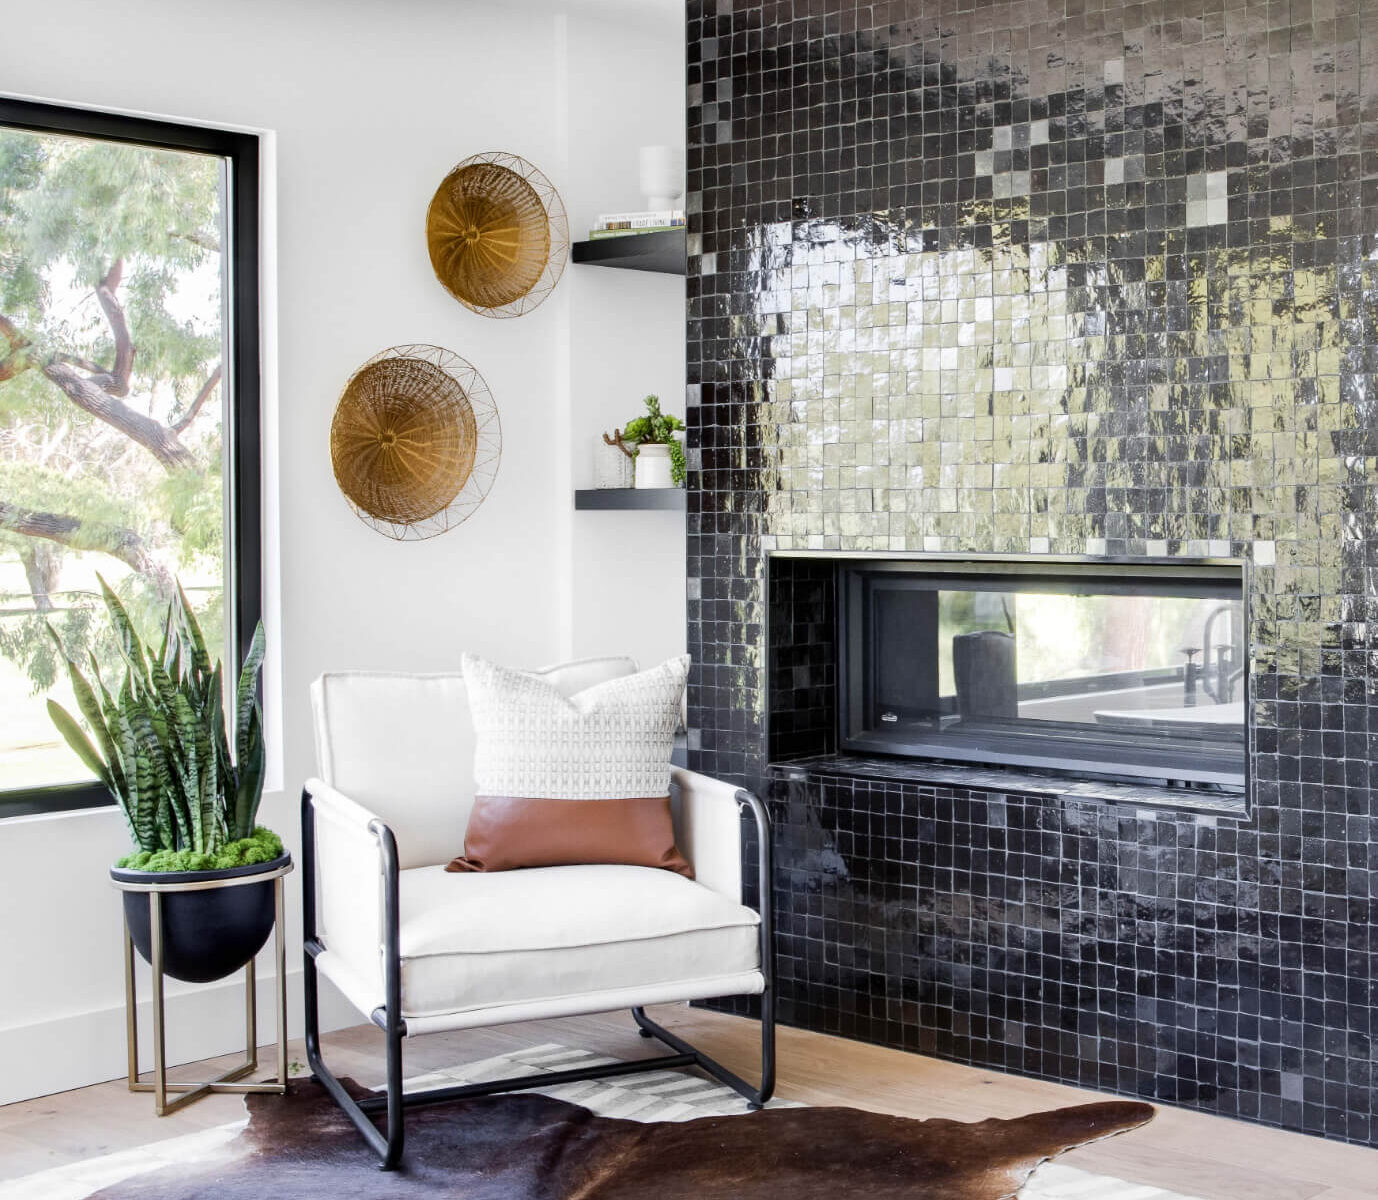 Spanish modern home interior design featuring a fireplace tiled with dark green ceramic tiles with white canvas lounge chair styled with a potted snake plant and cowhide rug